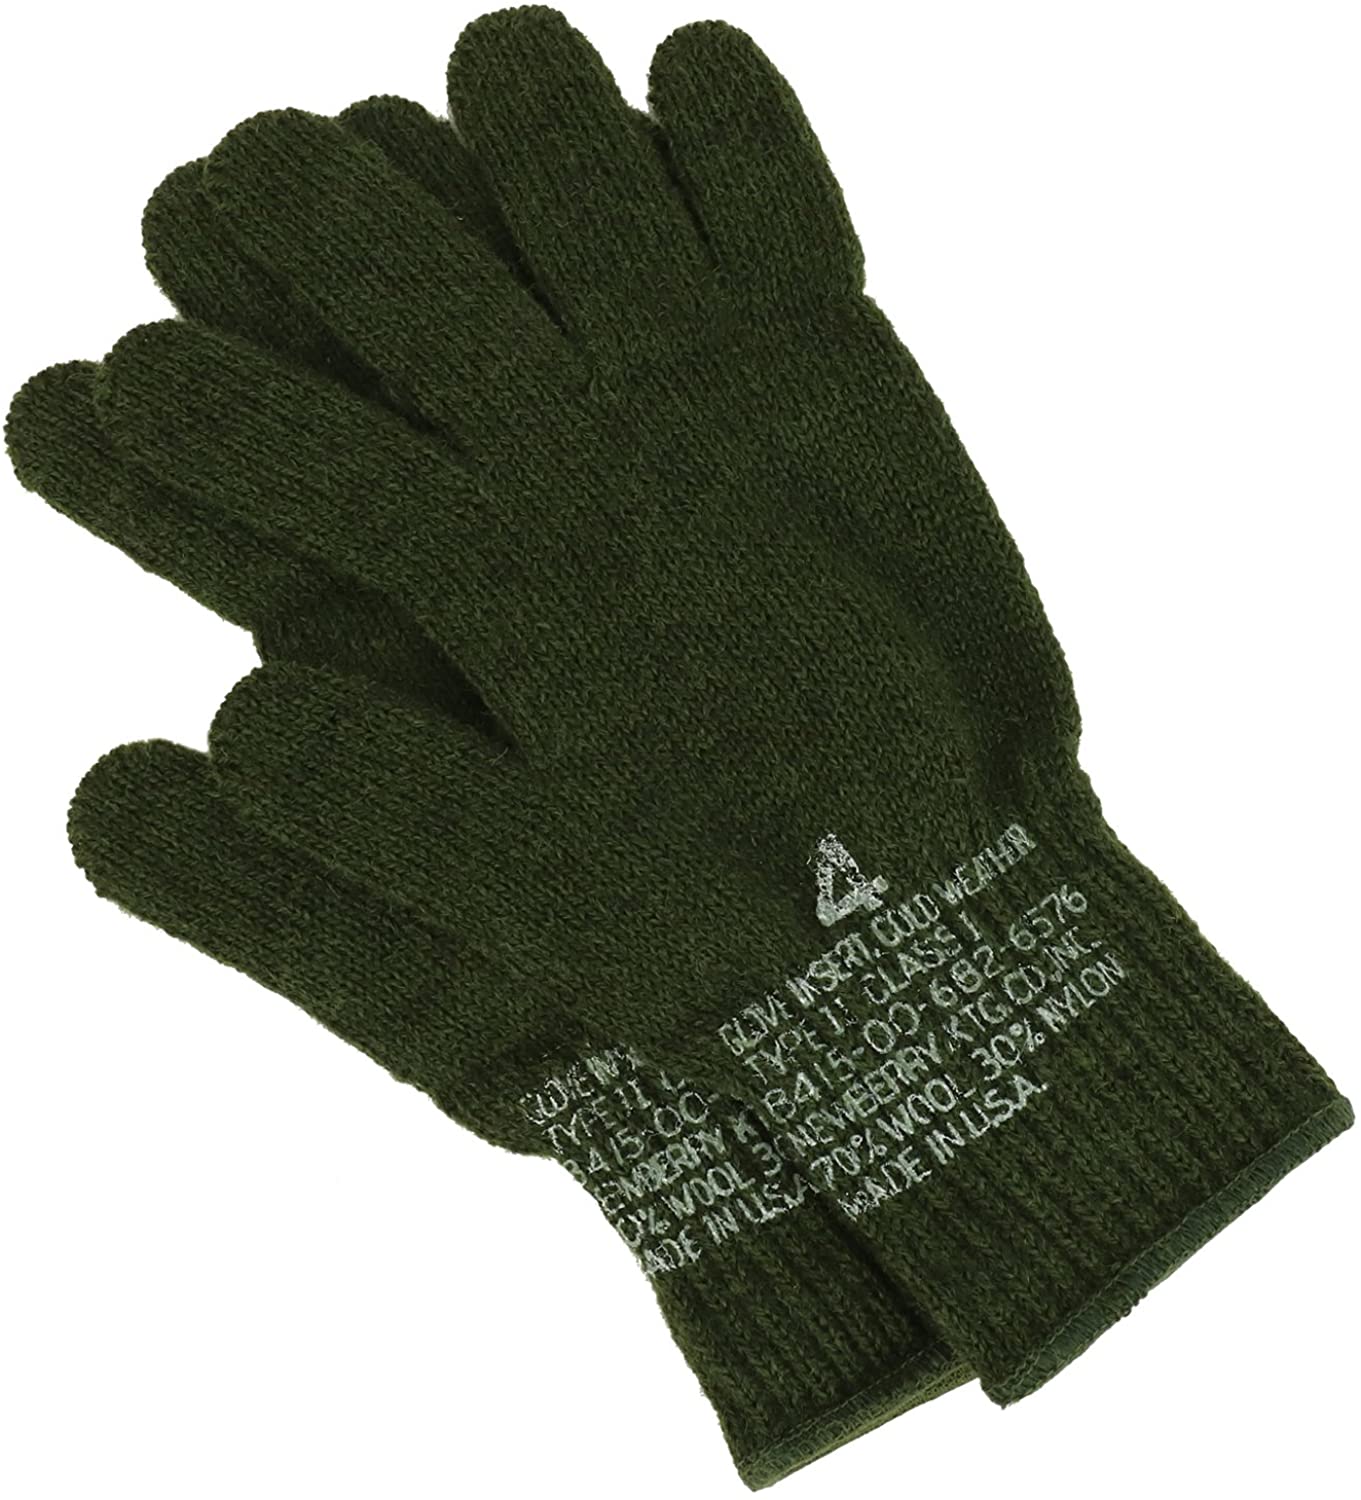 Armycrew Men's Goverment Issue Made in USA Wool Glove Liner